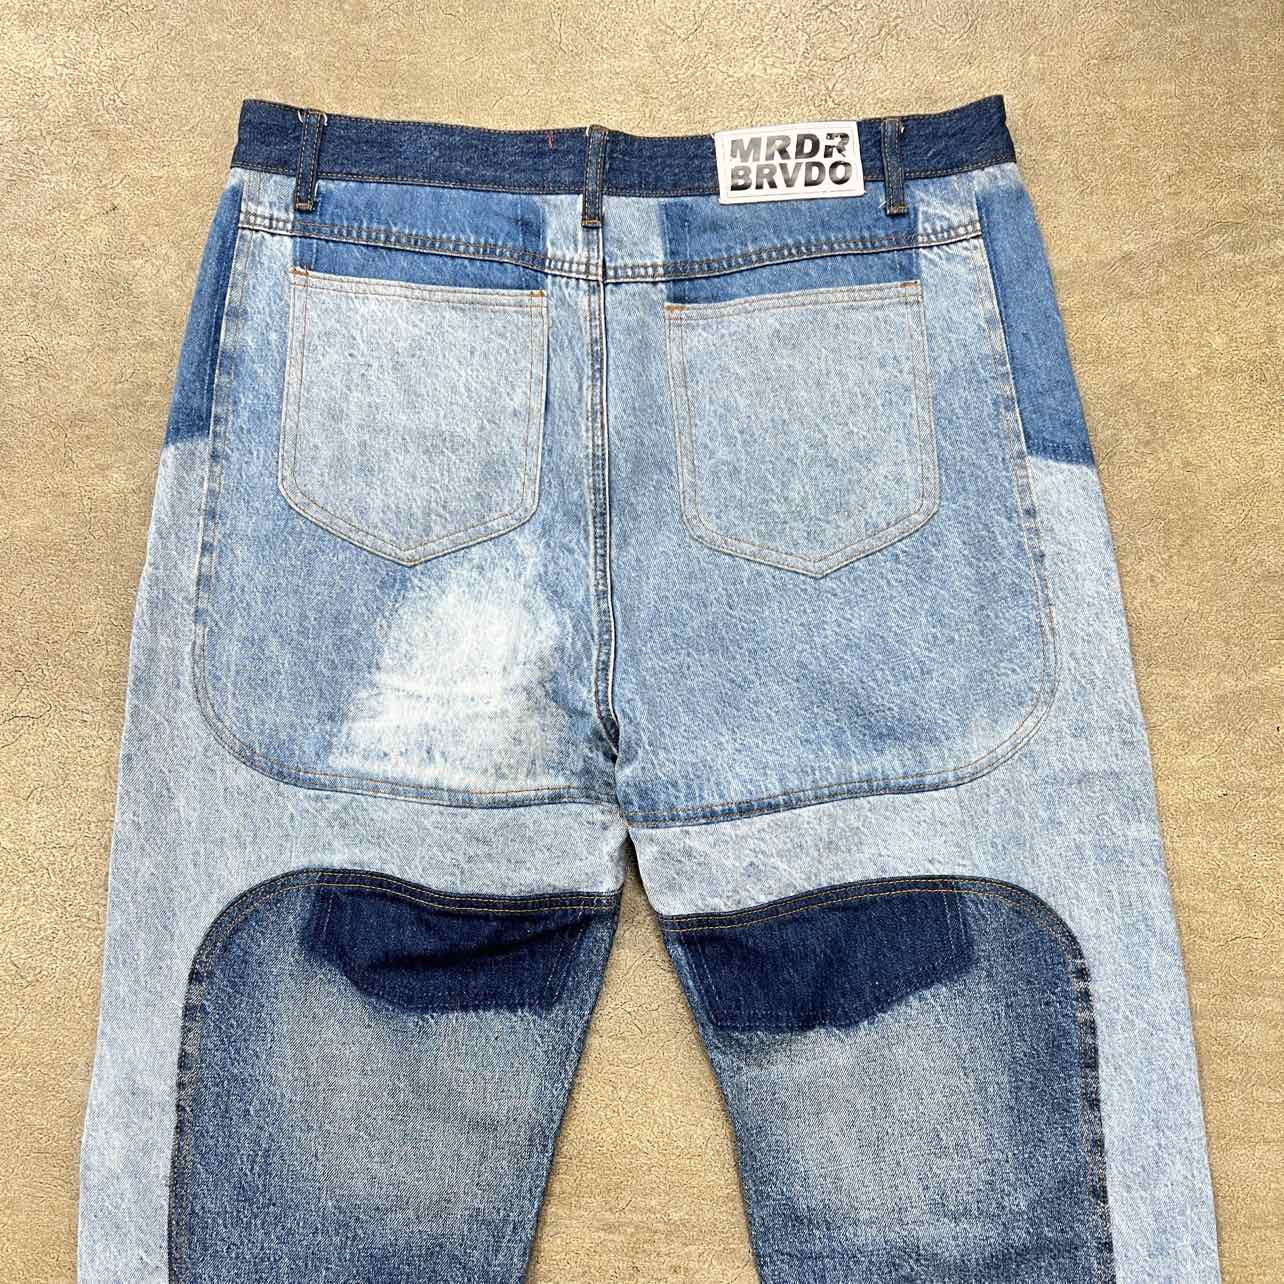 MURDER BRVDO Jeans &quot;PATCH&quot; Used Blue Size 38